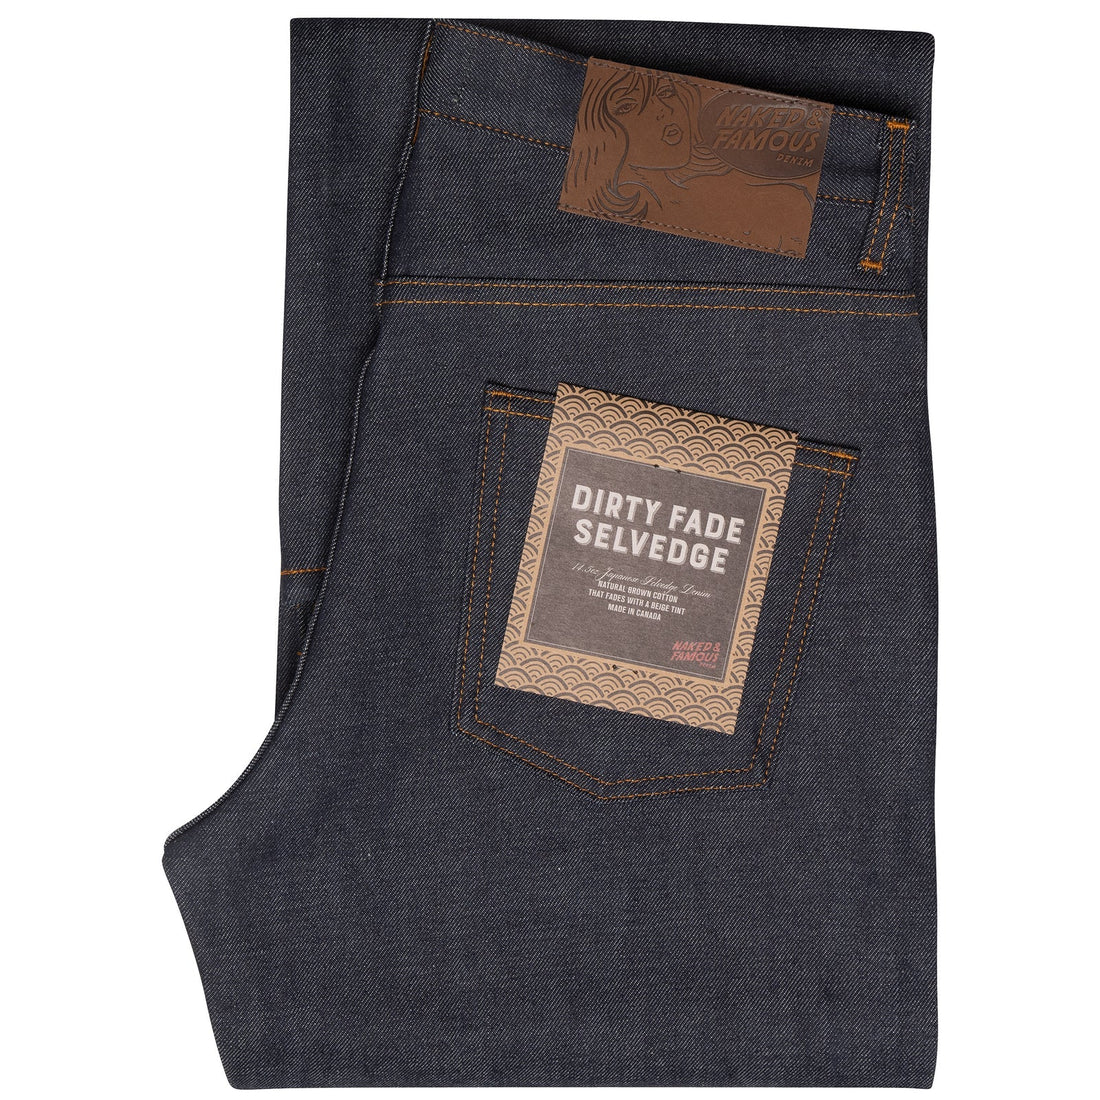 Naked &amp; Famous - Strong Guy - Dirty Fade Selvedge 14.5 oz - Vintage Jeans